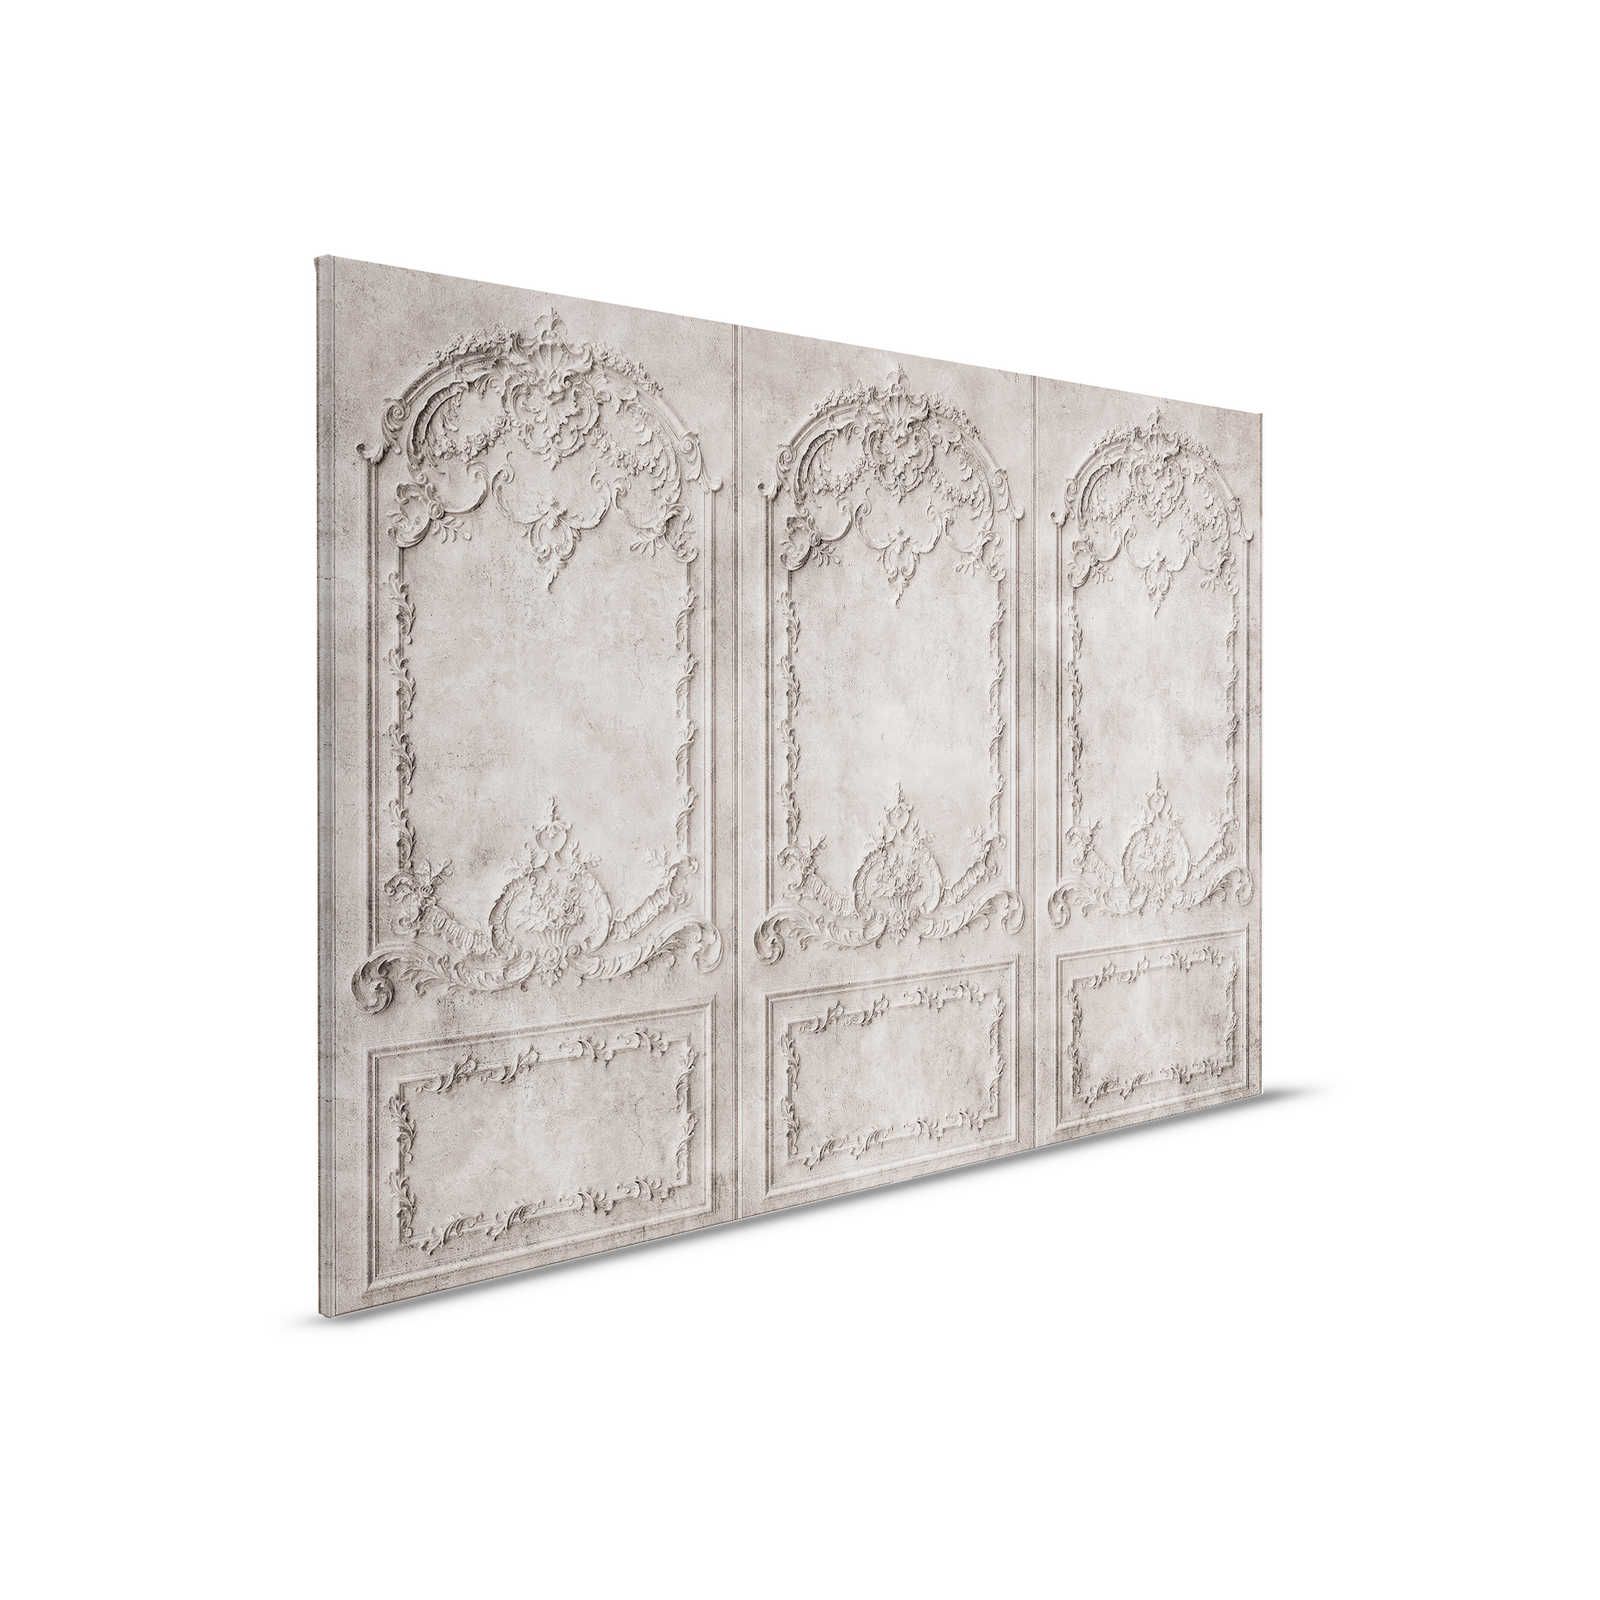 Versailles 1 - Canvas painting Grey-Brown Baroque style wooden panels - 0.90 m x 0.60 m
